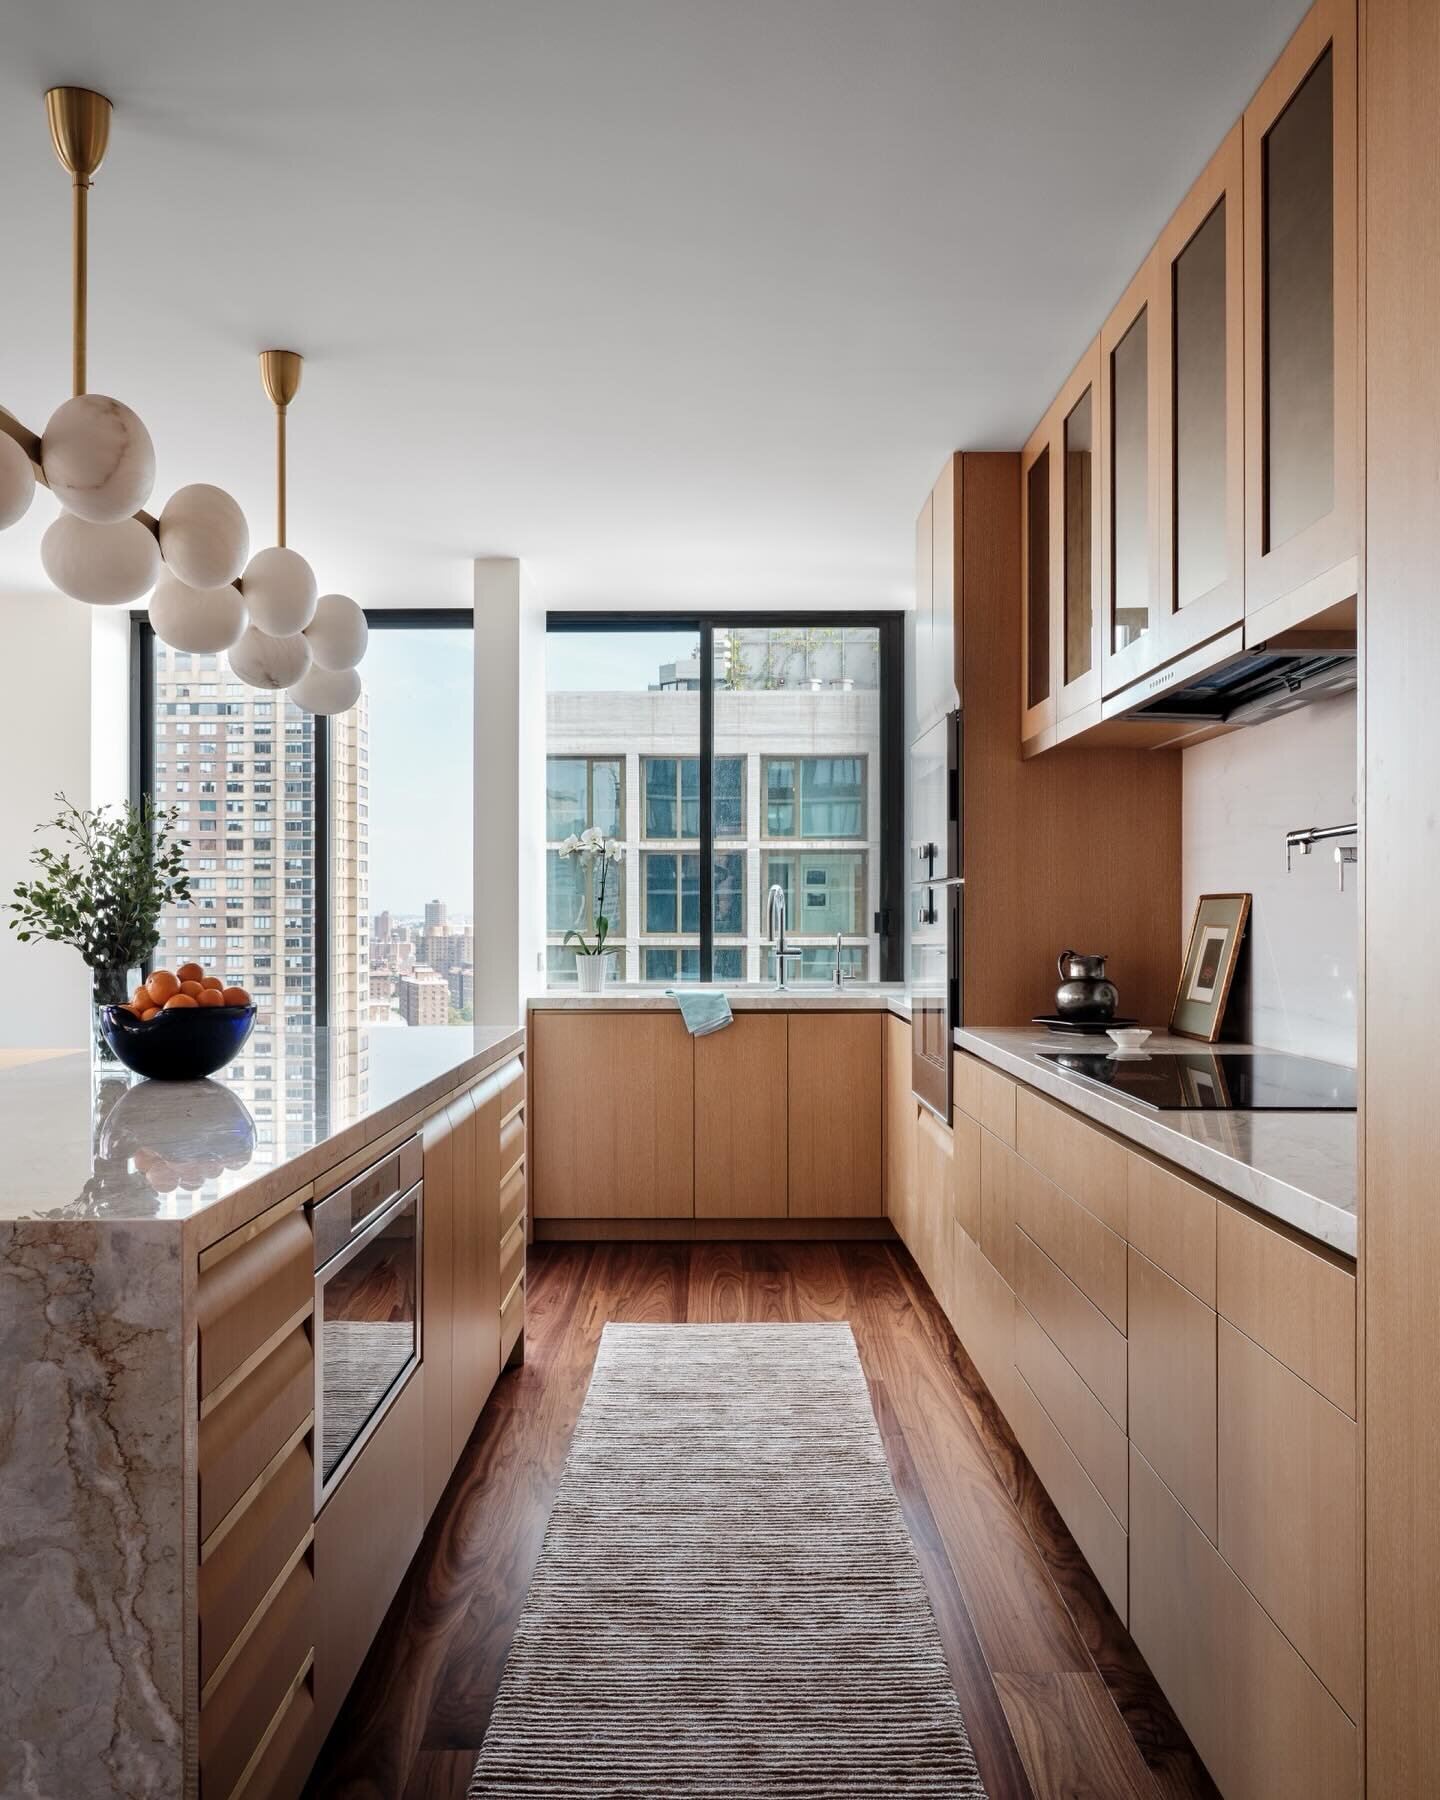 Step into sophistication.

Warmly renovated UES apartment brought to life by @fontanarchitecture @jorgefontan.aia @kjremodeling @mimo729

#kitchenrenovation #luxuryinteriors #nycarchitecture #nycinteriordesign #photoshoot